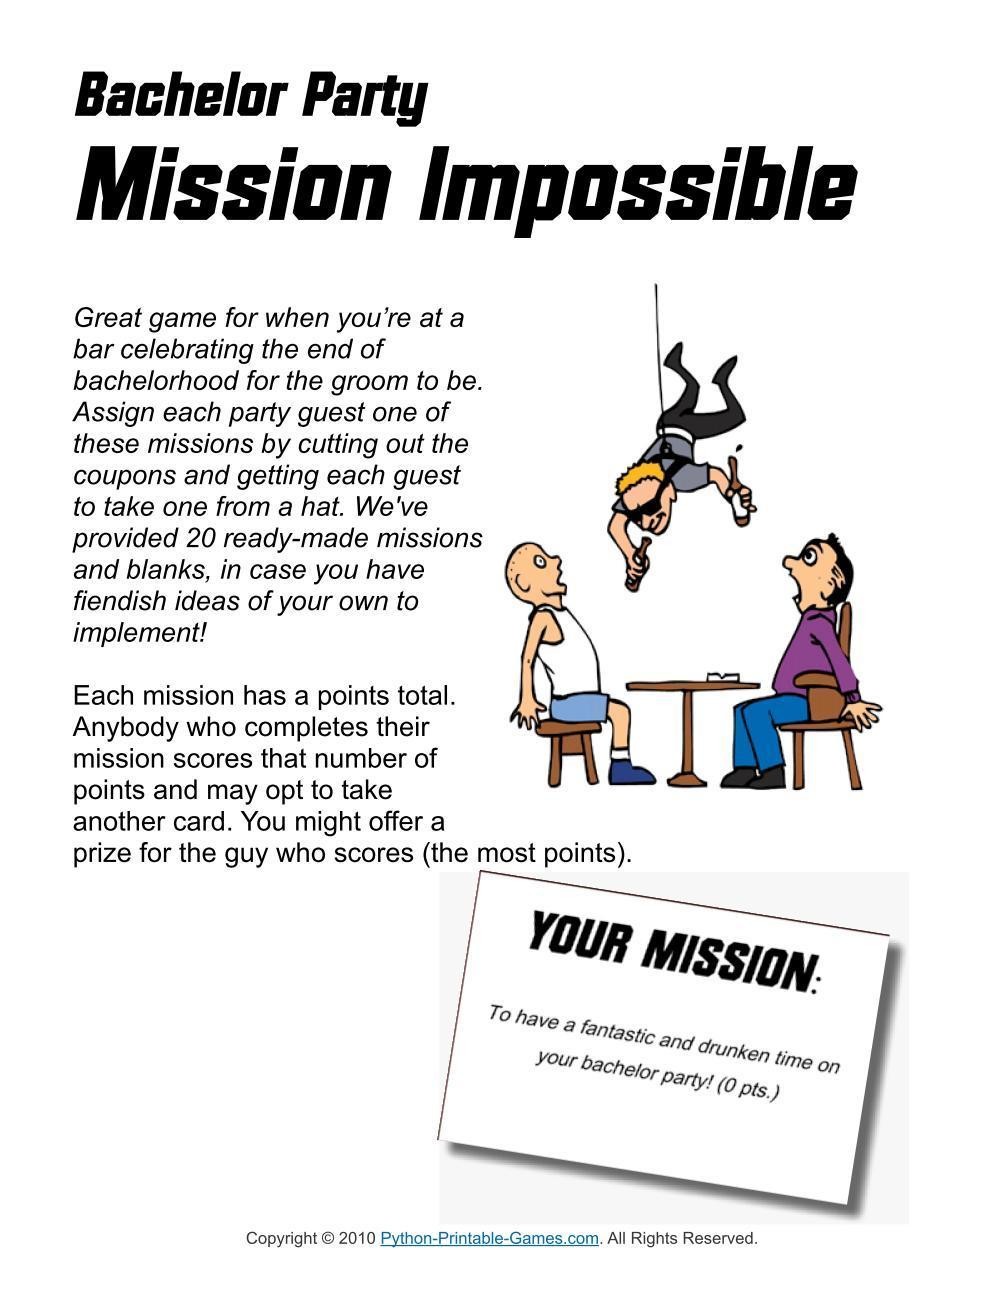 Bachelor Party: Bachelor Party Mission Impossible